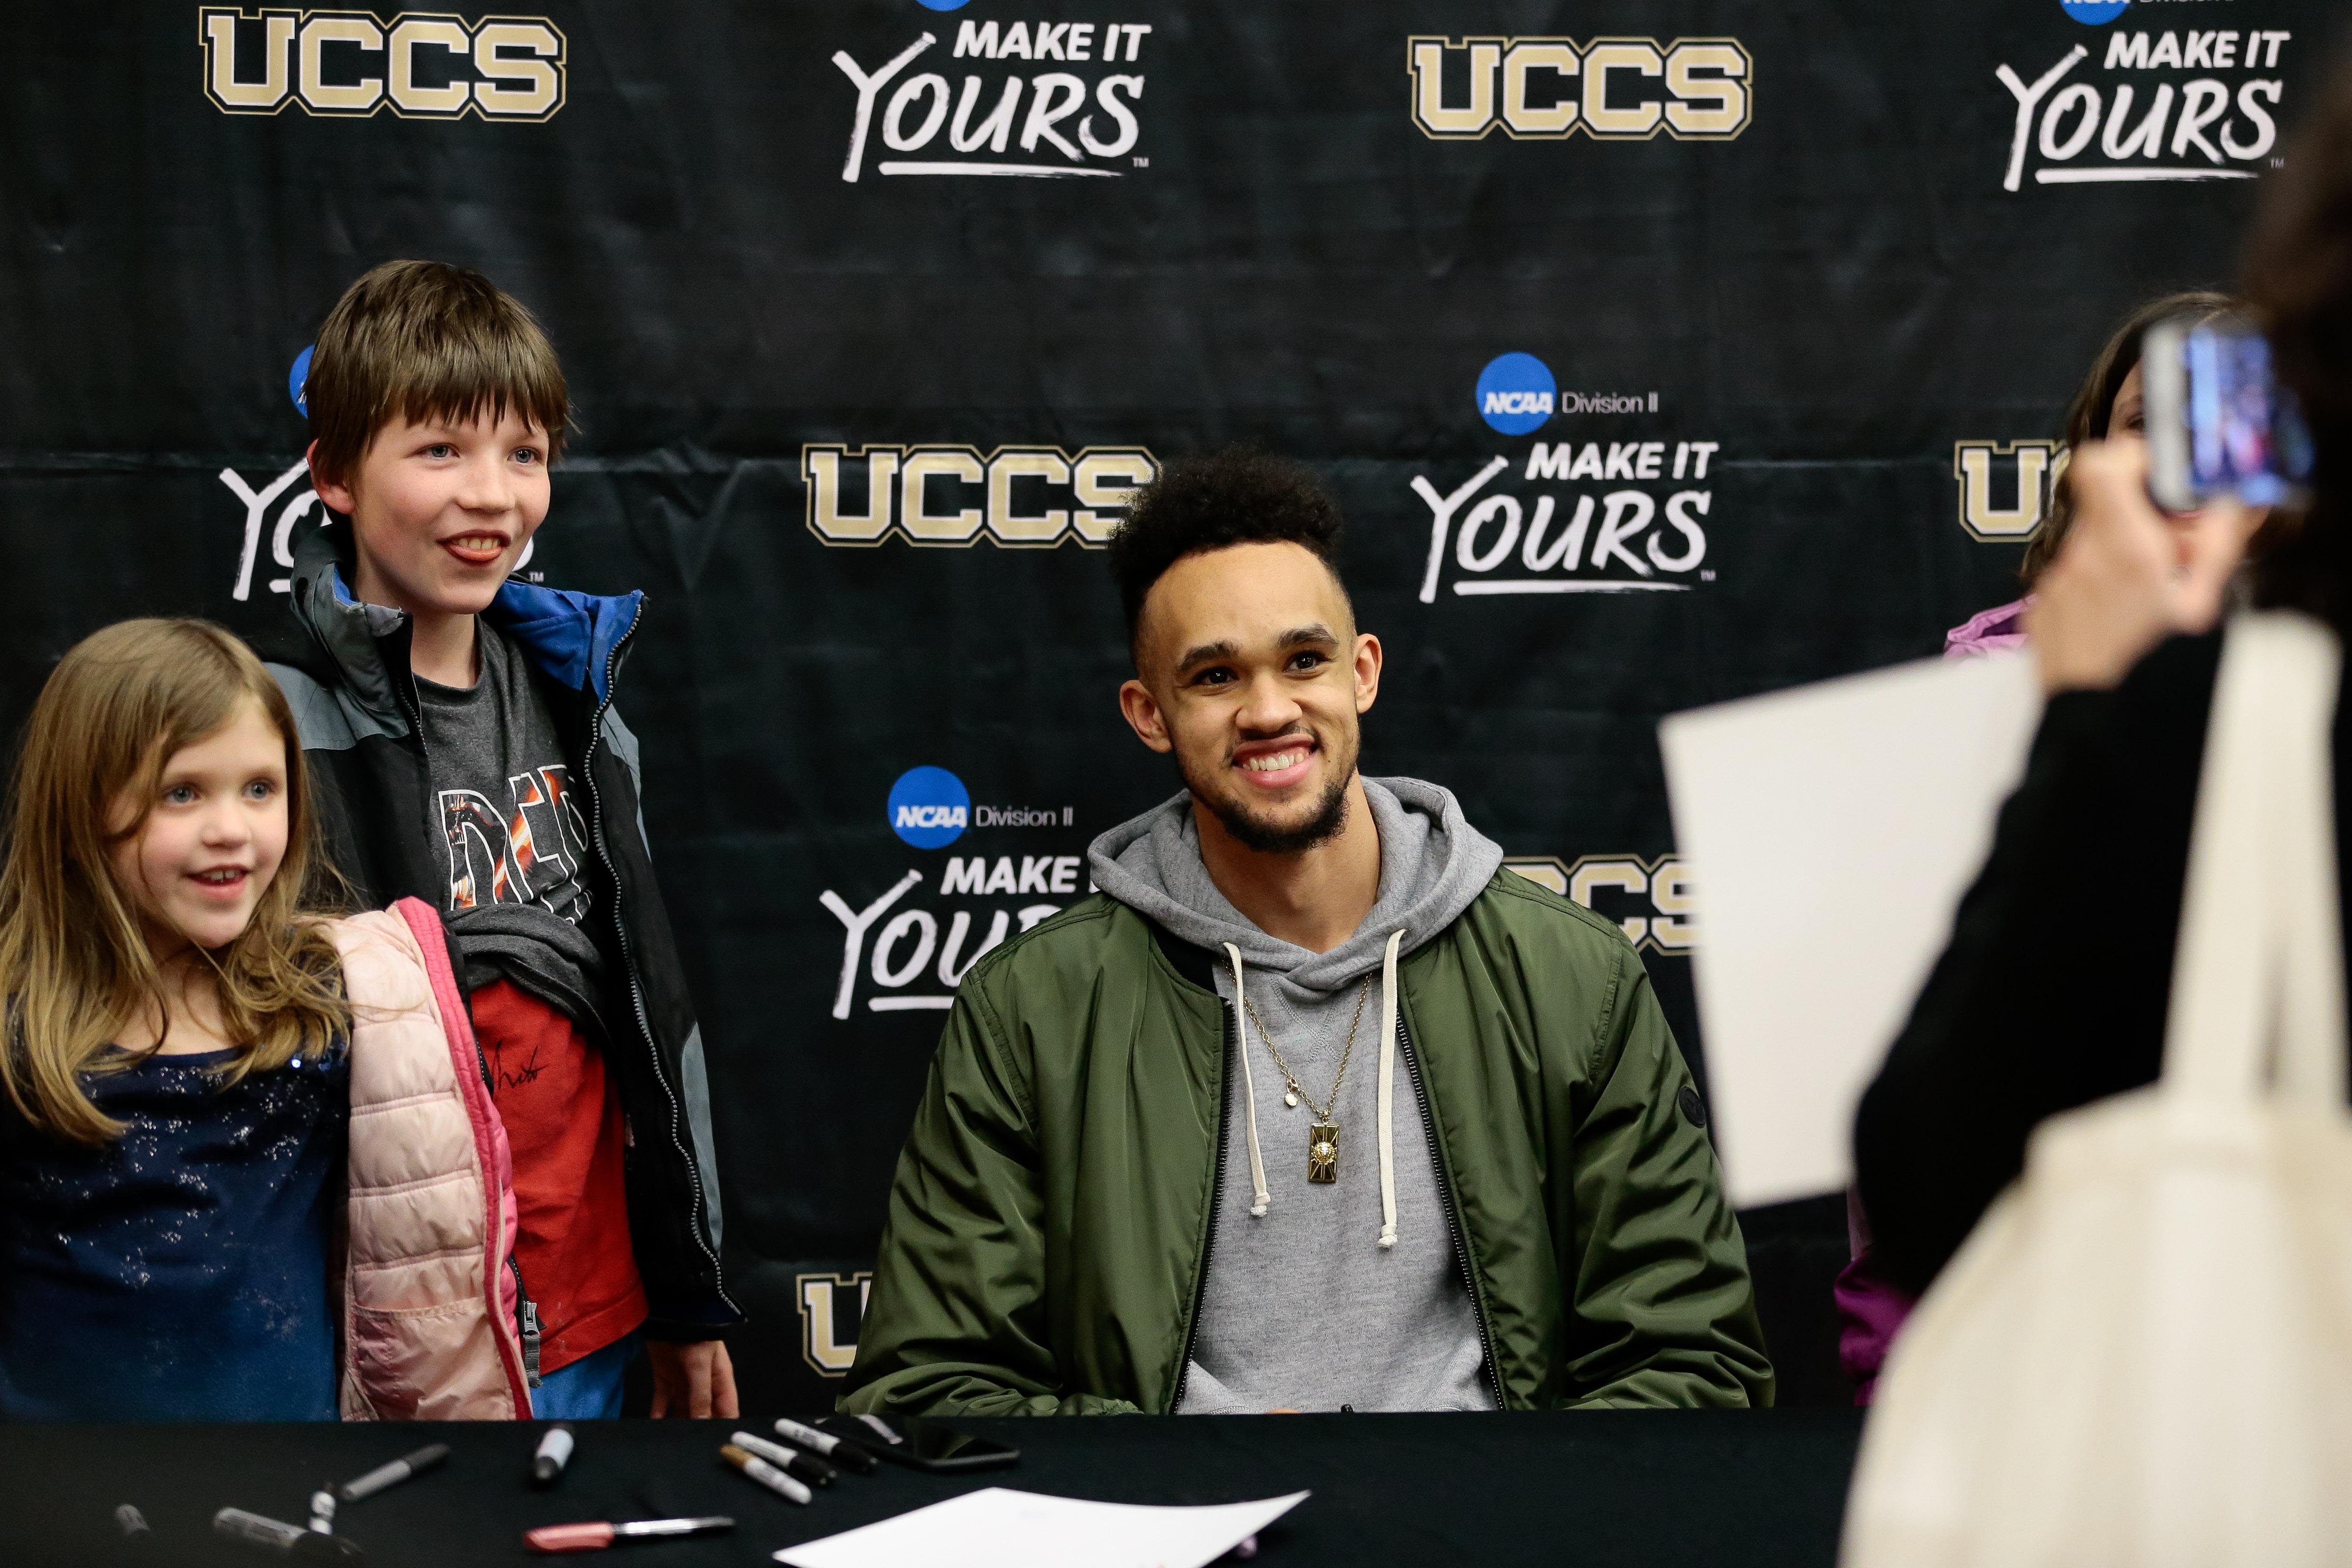 Former UCCS standout Derrick White has seen production explode